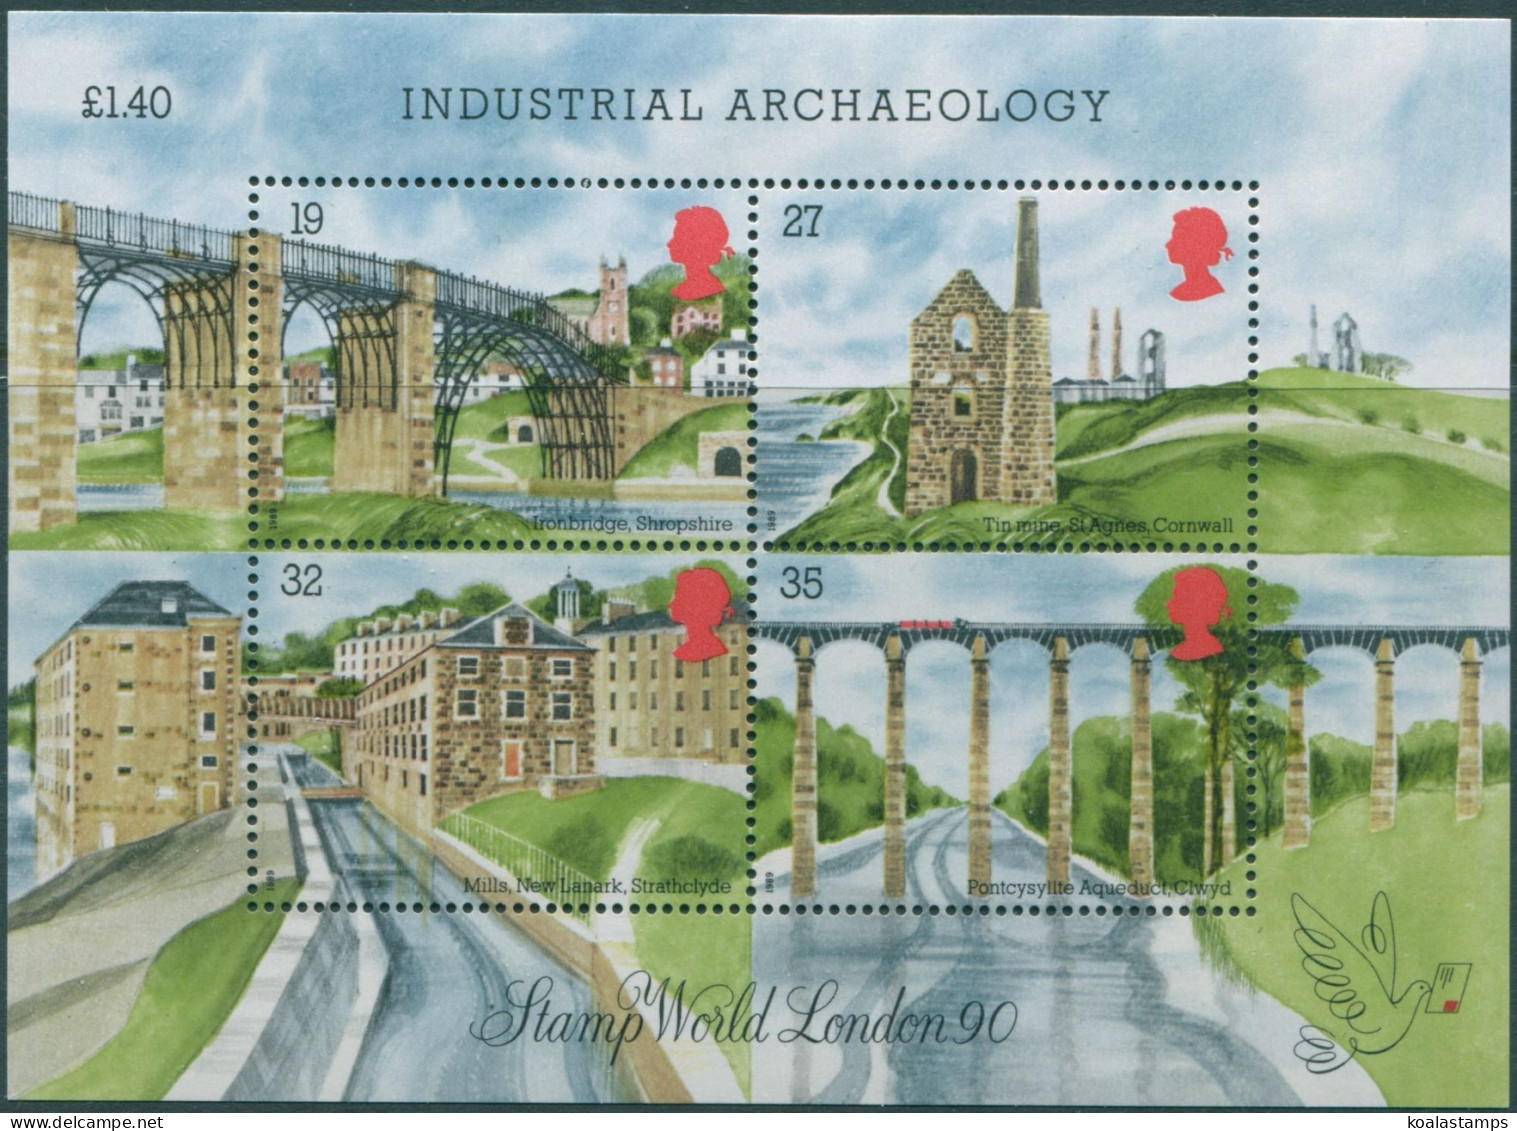 Great Britain 1989 SG1444 QEII Industrial Archaeology MS MNH - Unclassified